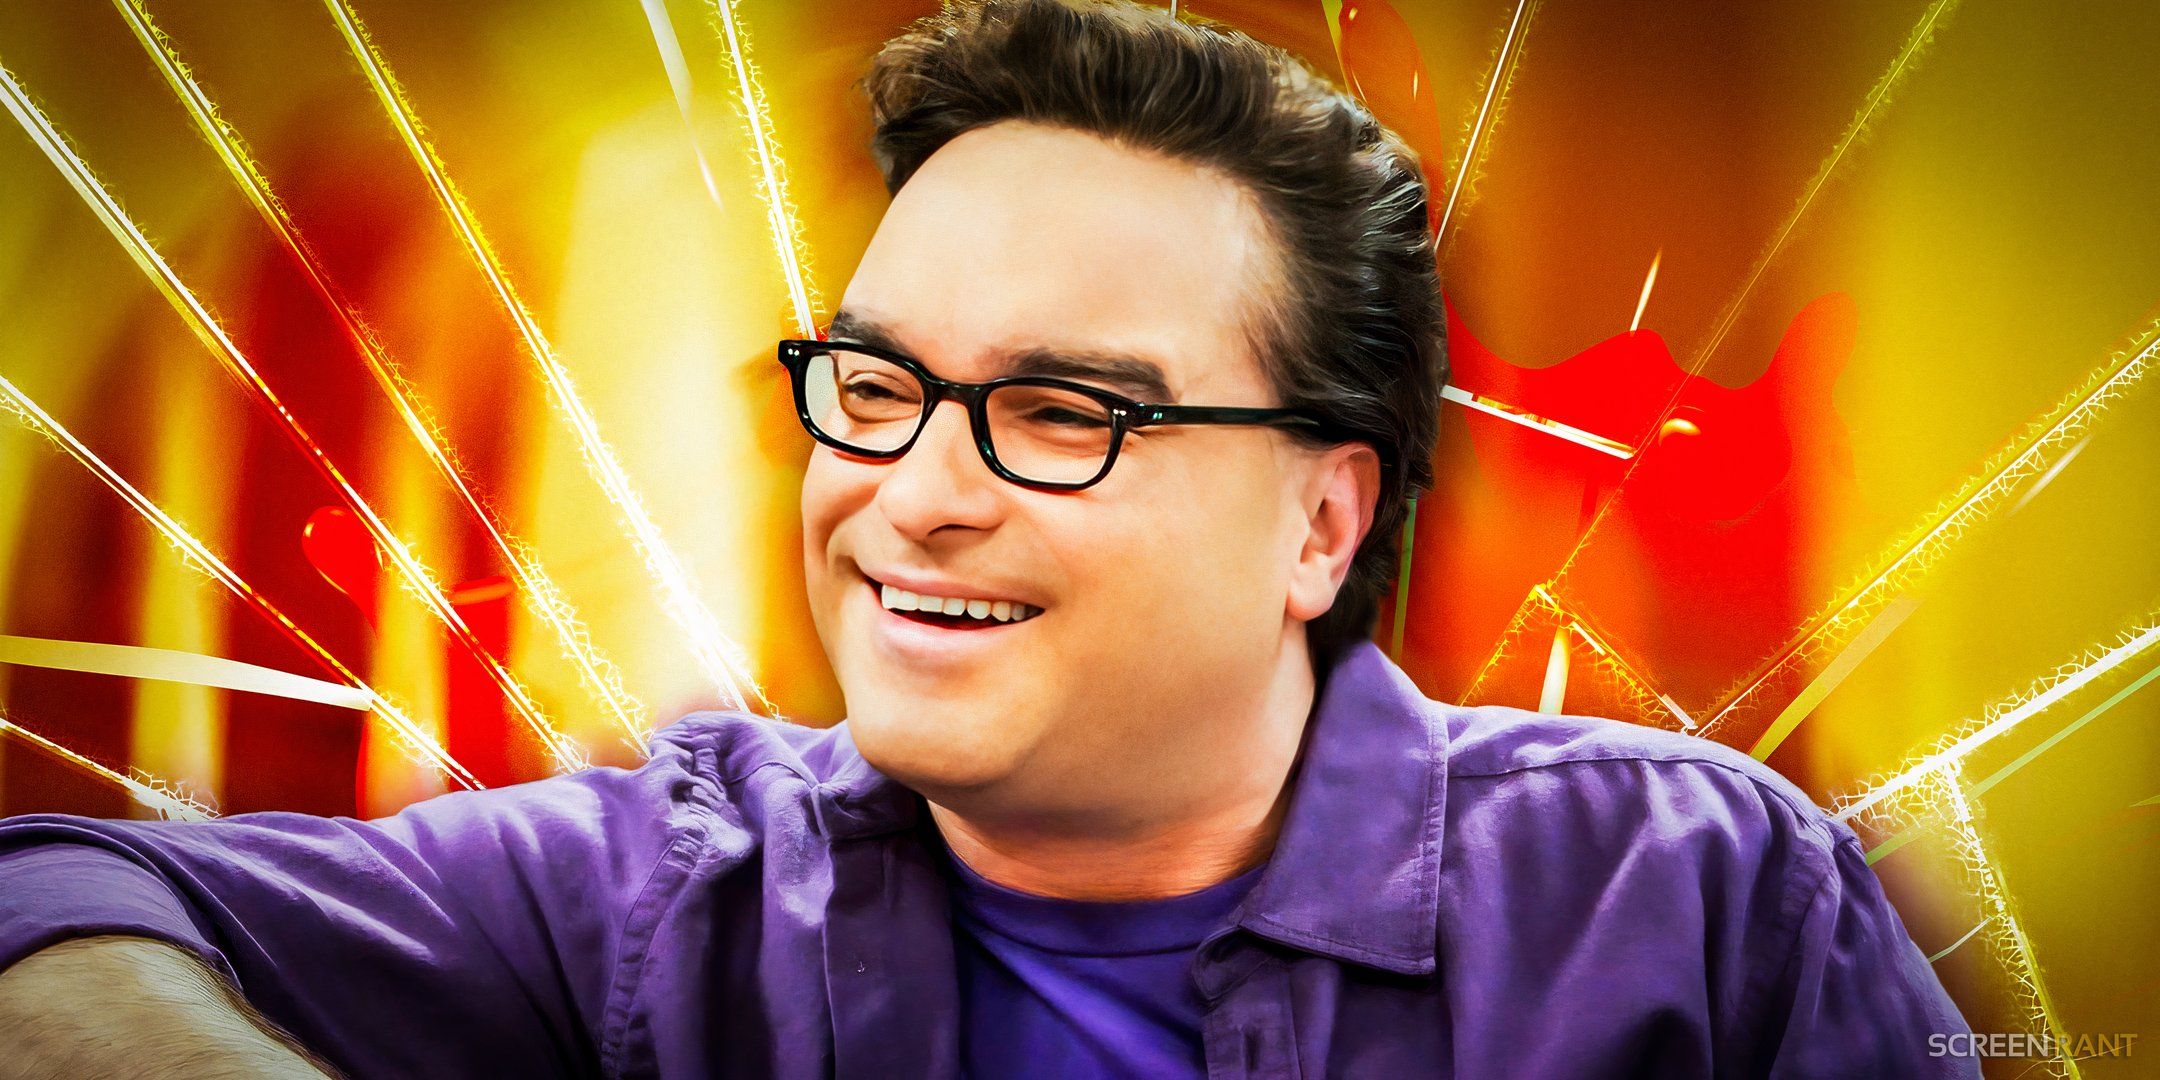 Johnny Galecki as Leonard Hofstadter in The Big Bang Theory smiling in front of a yellow and red background